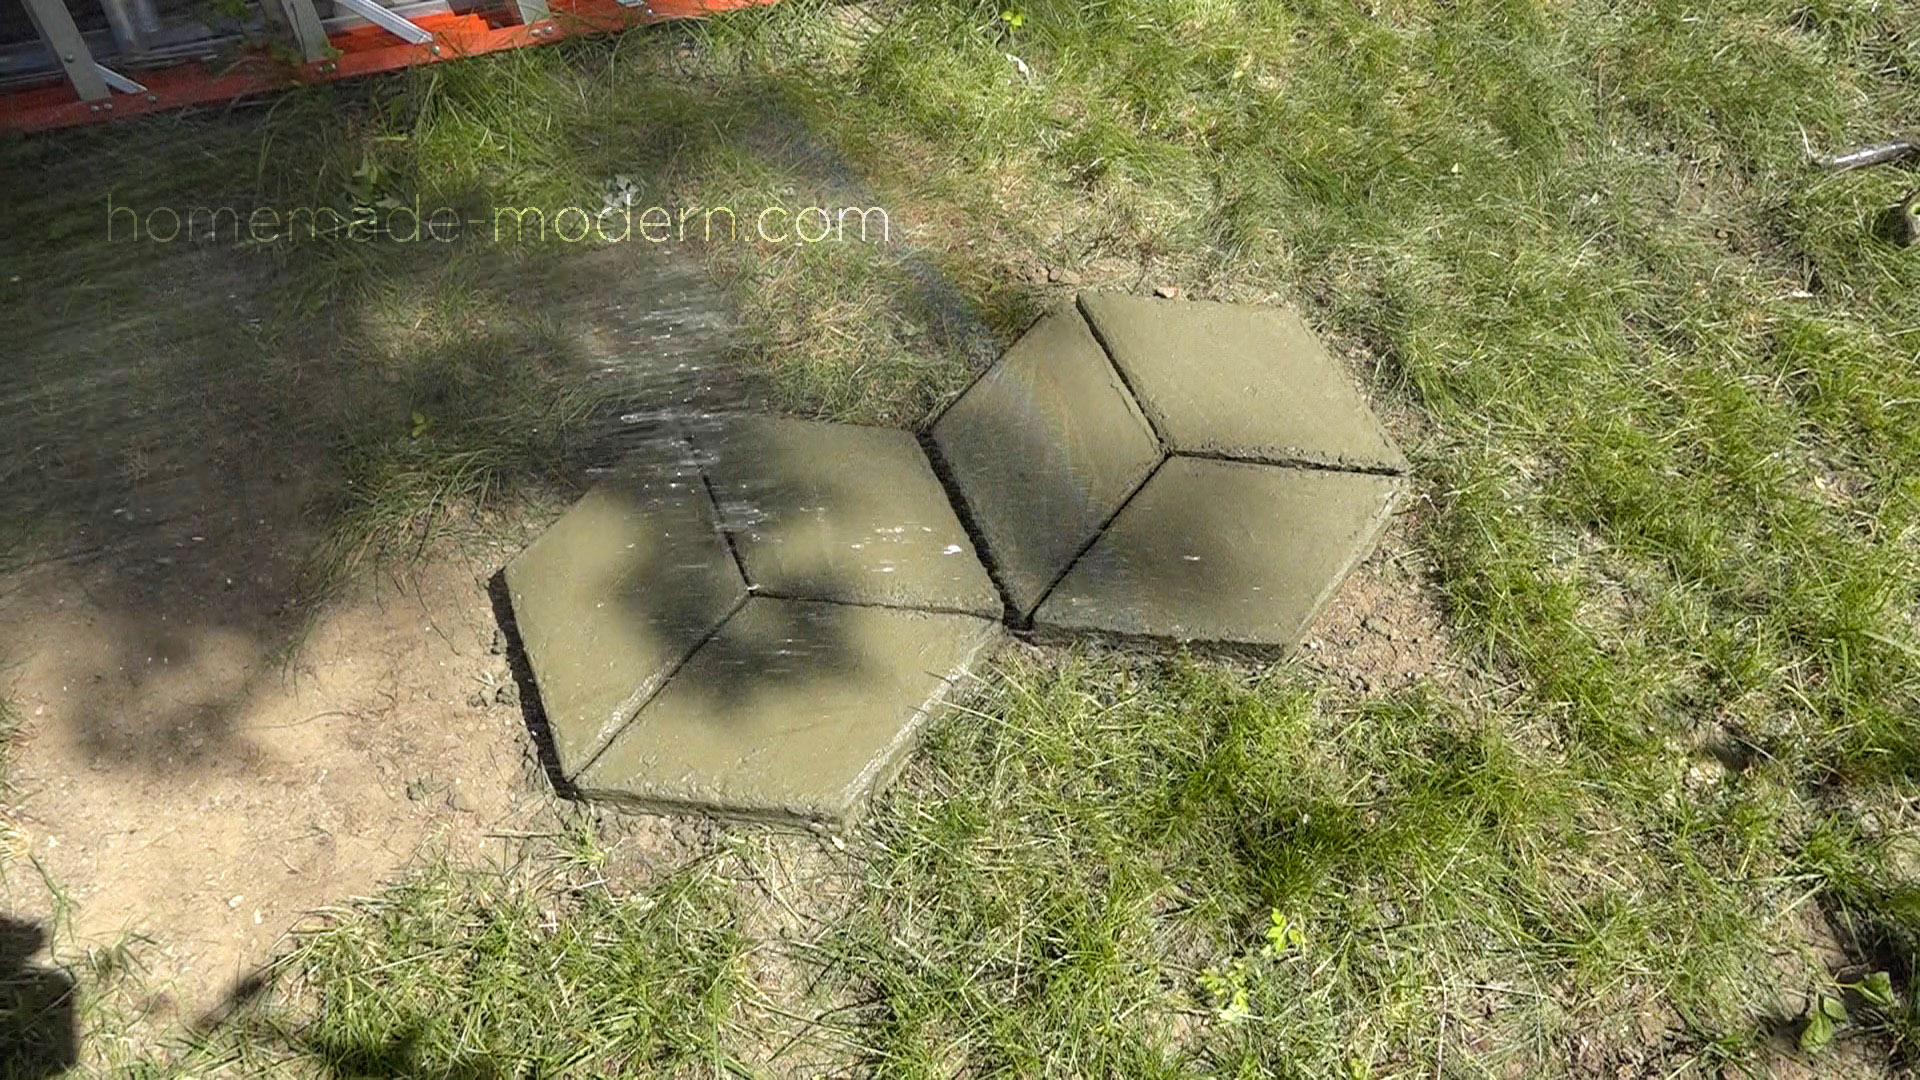 These modular modern concrete pavers was made from Quikrete 5000. The forms for the pieces were made with small CNC machine. For more information go to HomeMade-Modern.com